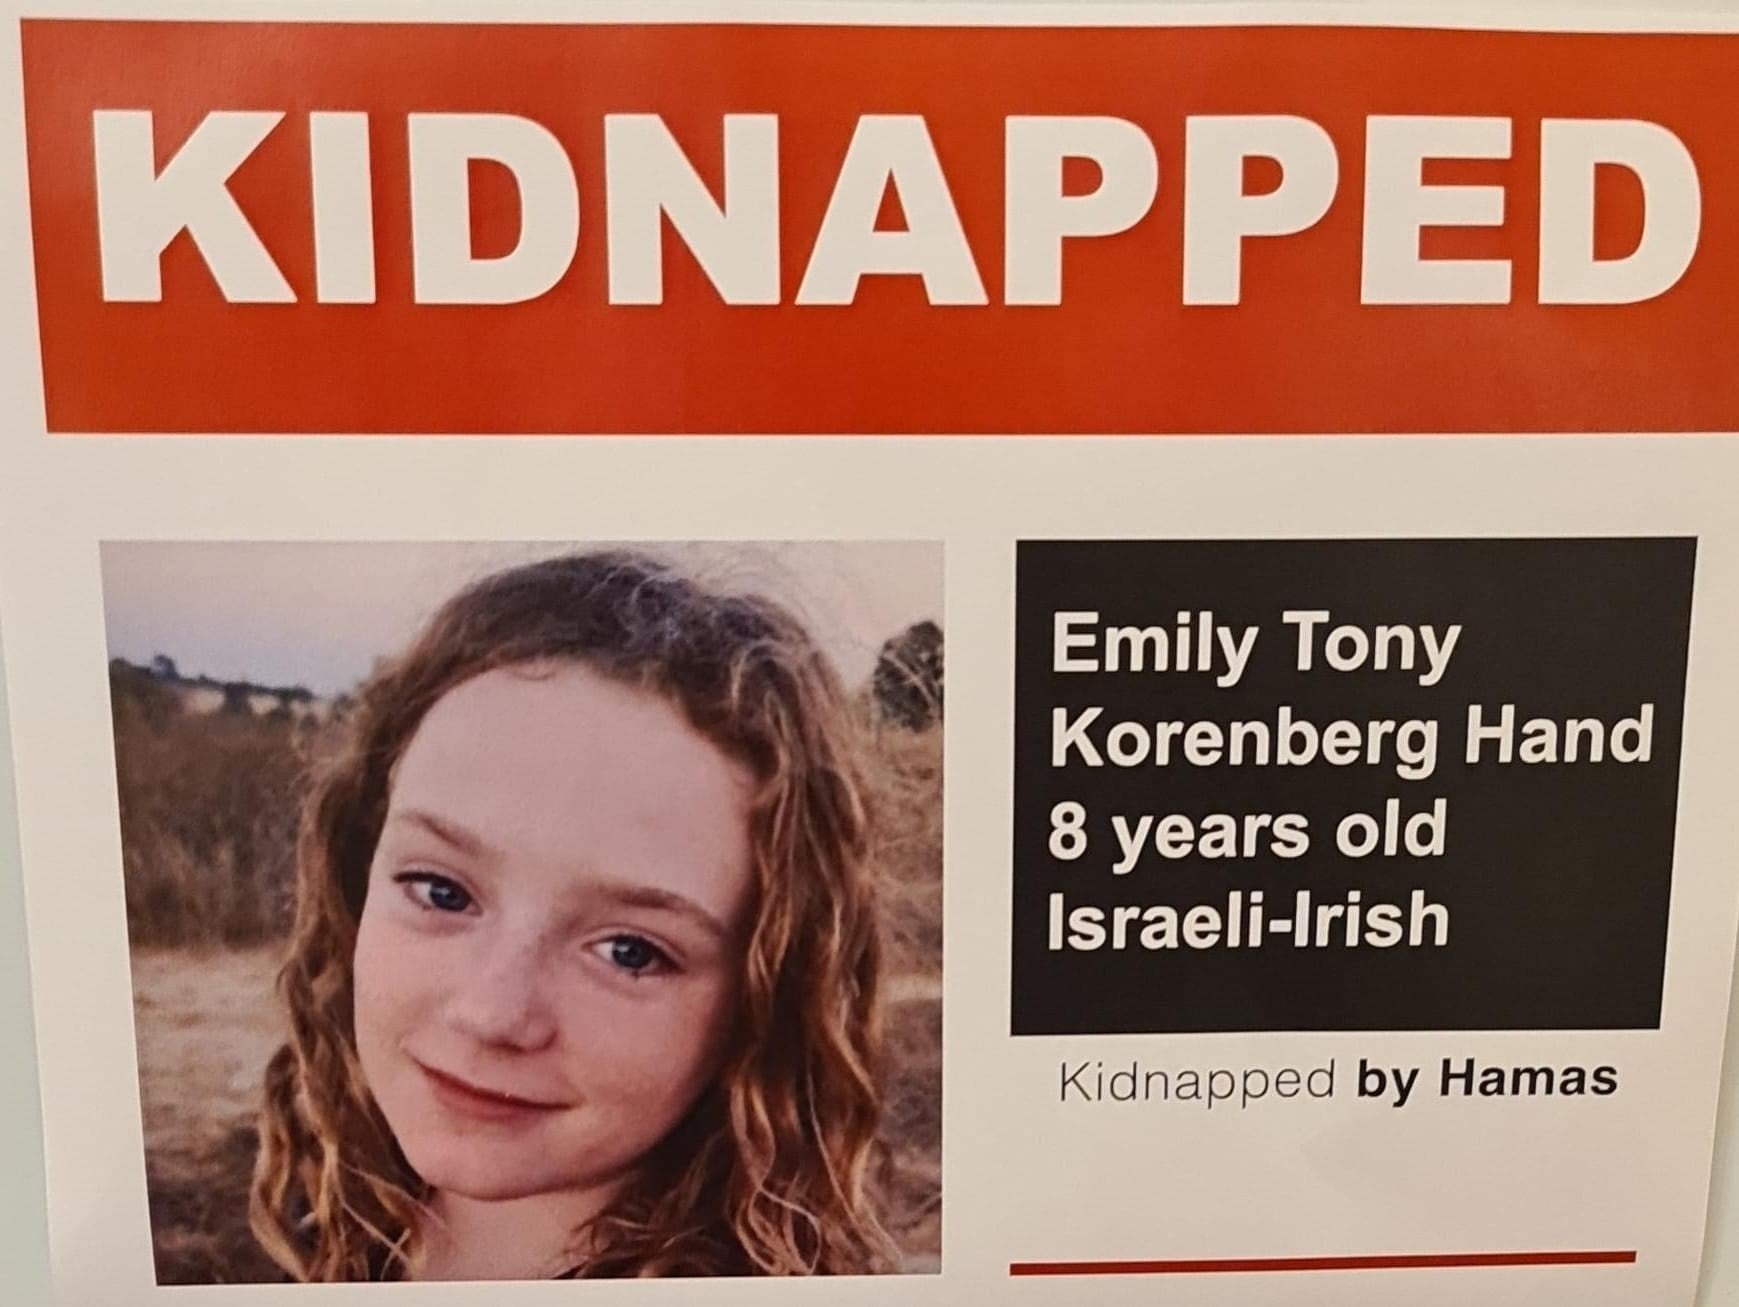 Emily Hand, 9, kidnapped from Kibbutz Be’eri and taken to Gaza by Hamas